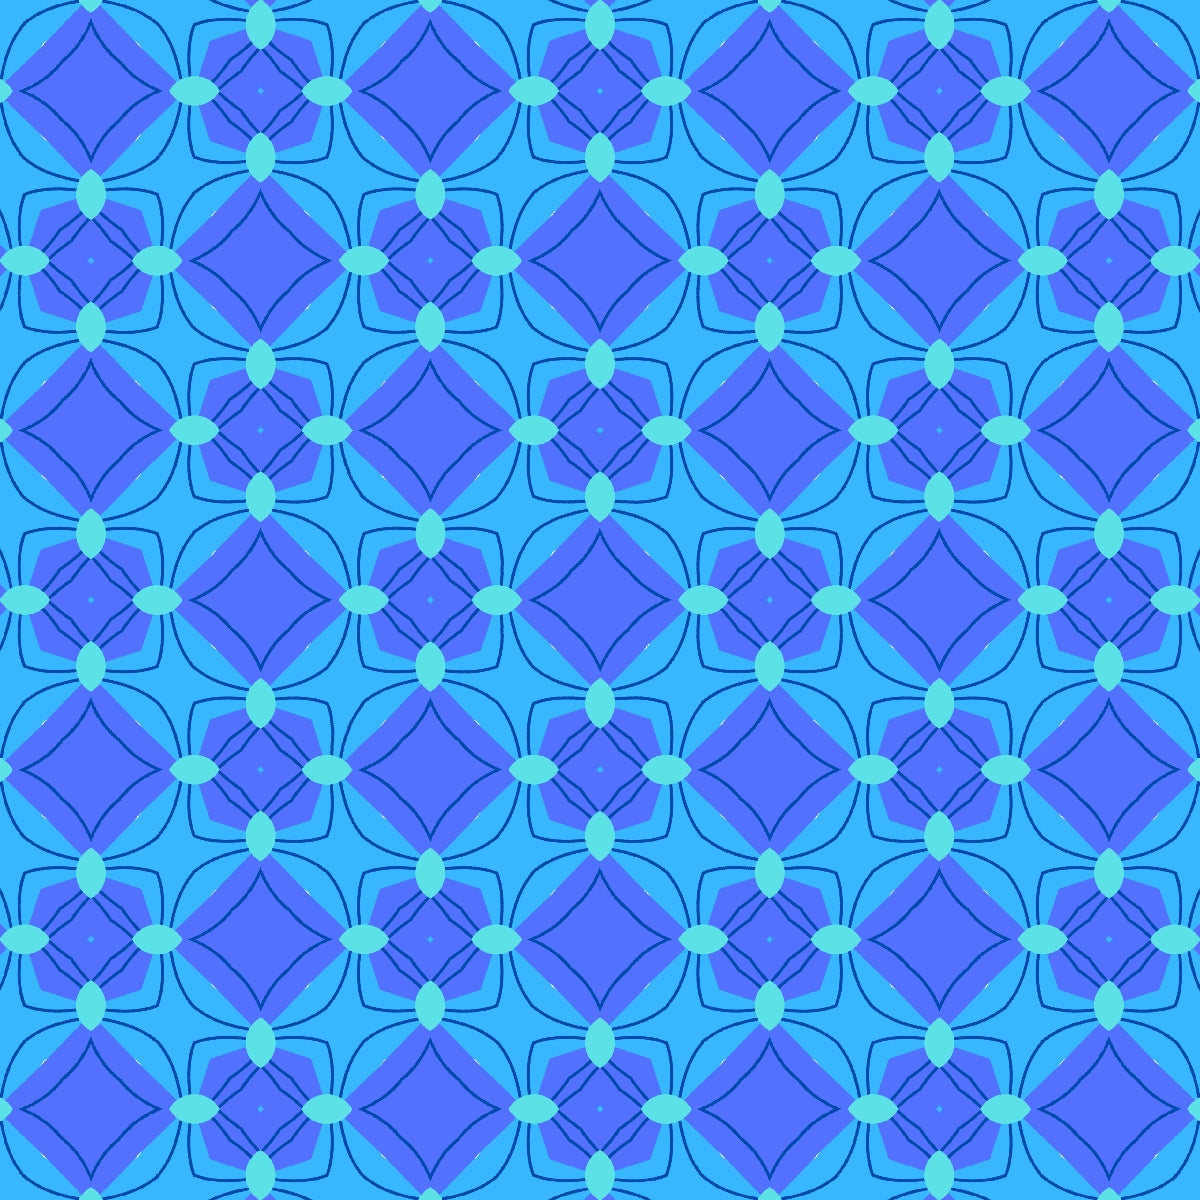 Blue Abstract Seamless Pattern 9.0 - Printable Scrapbook Paper